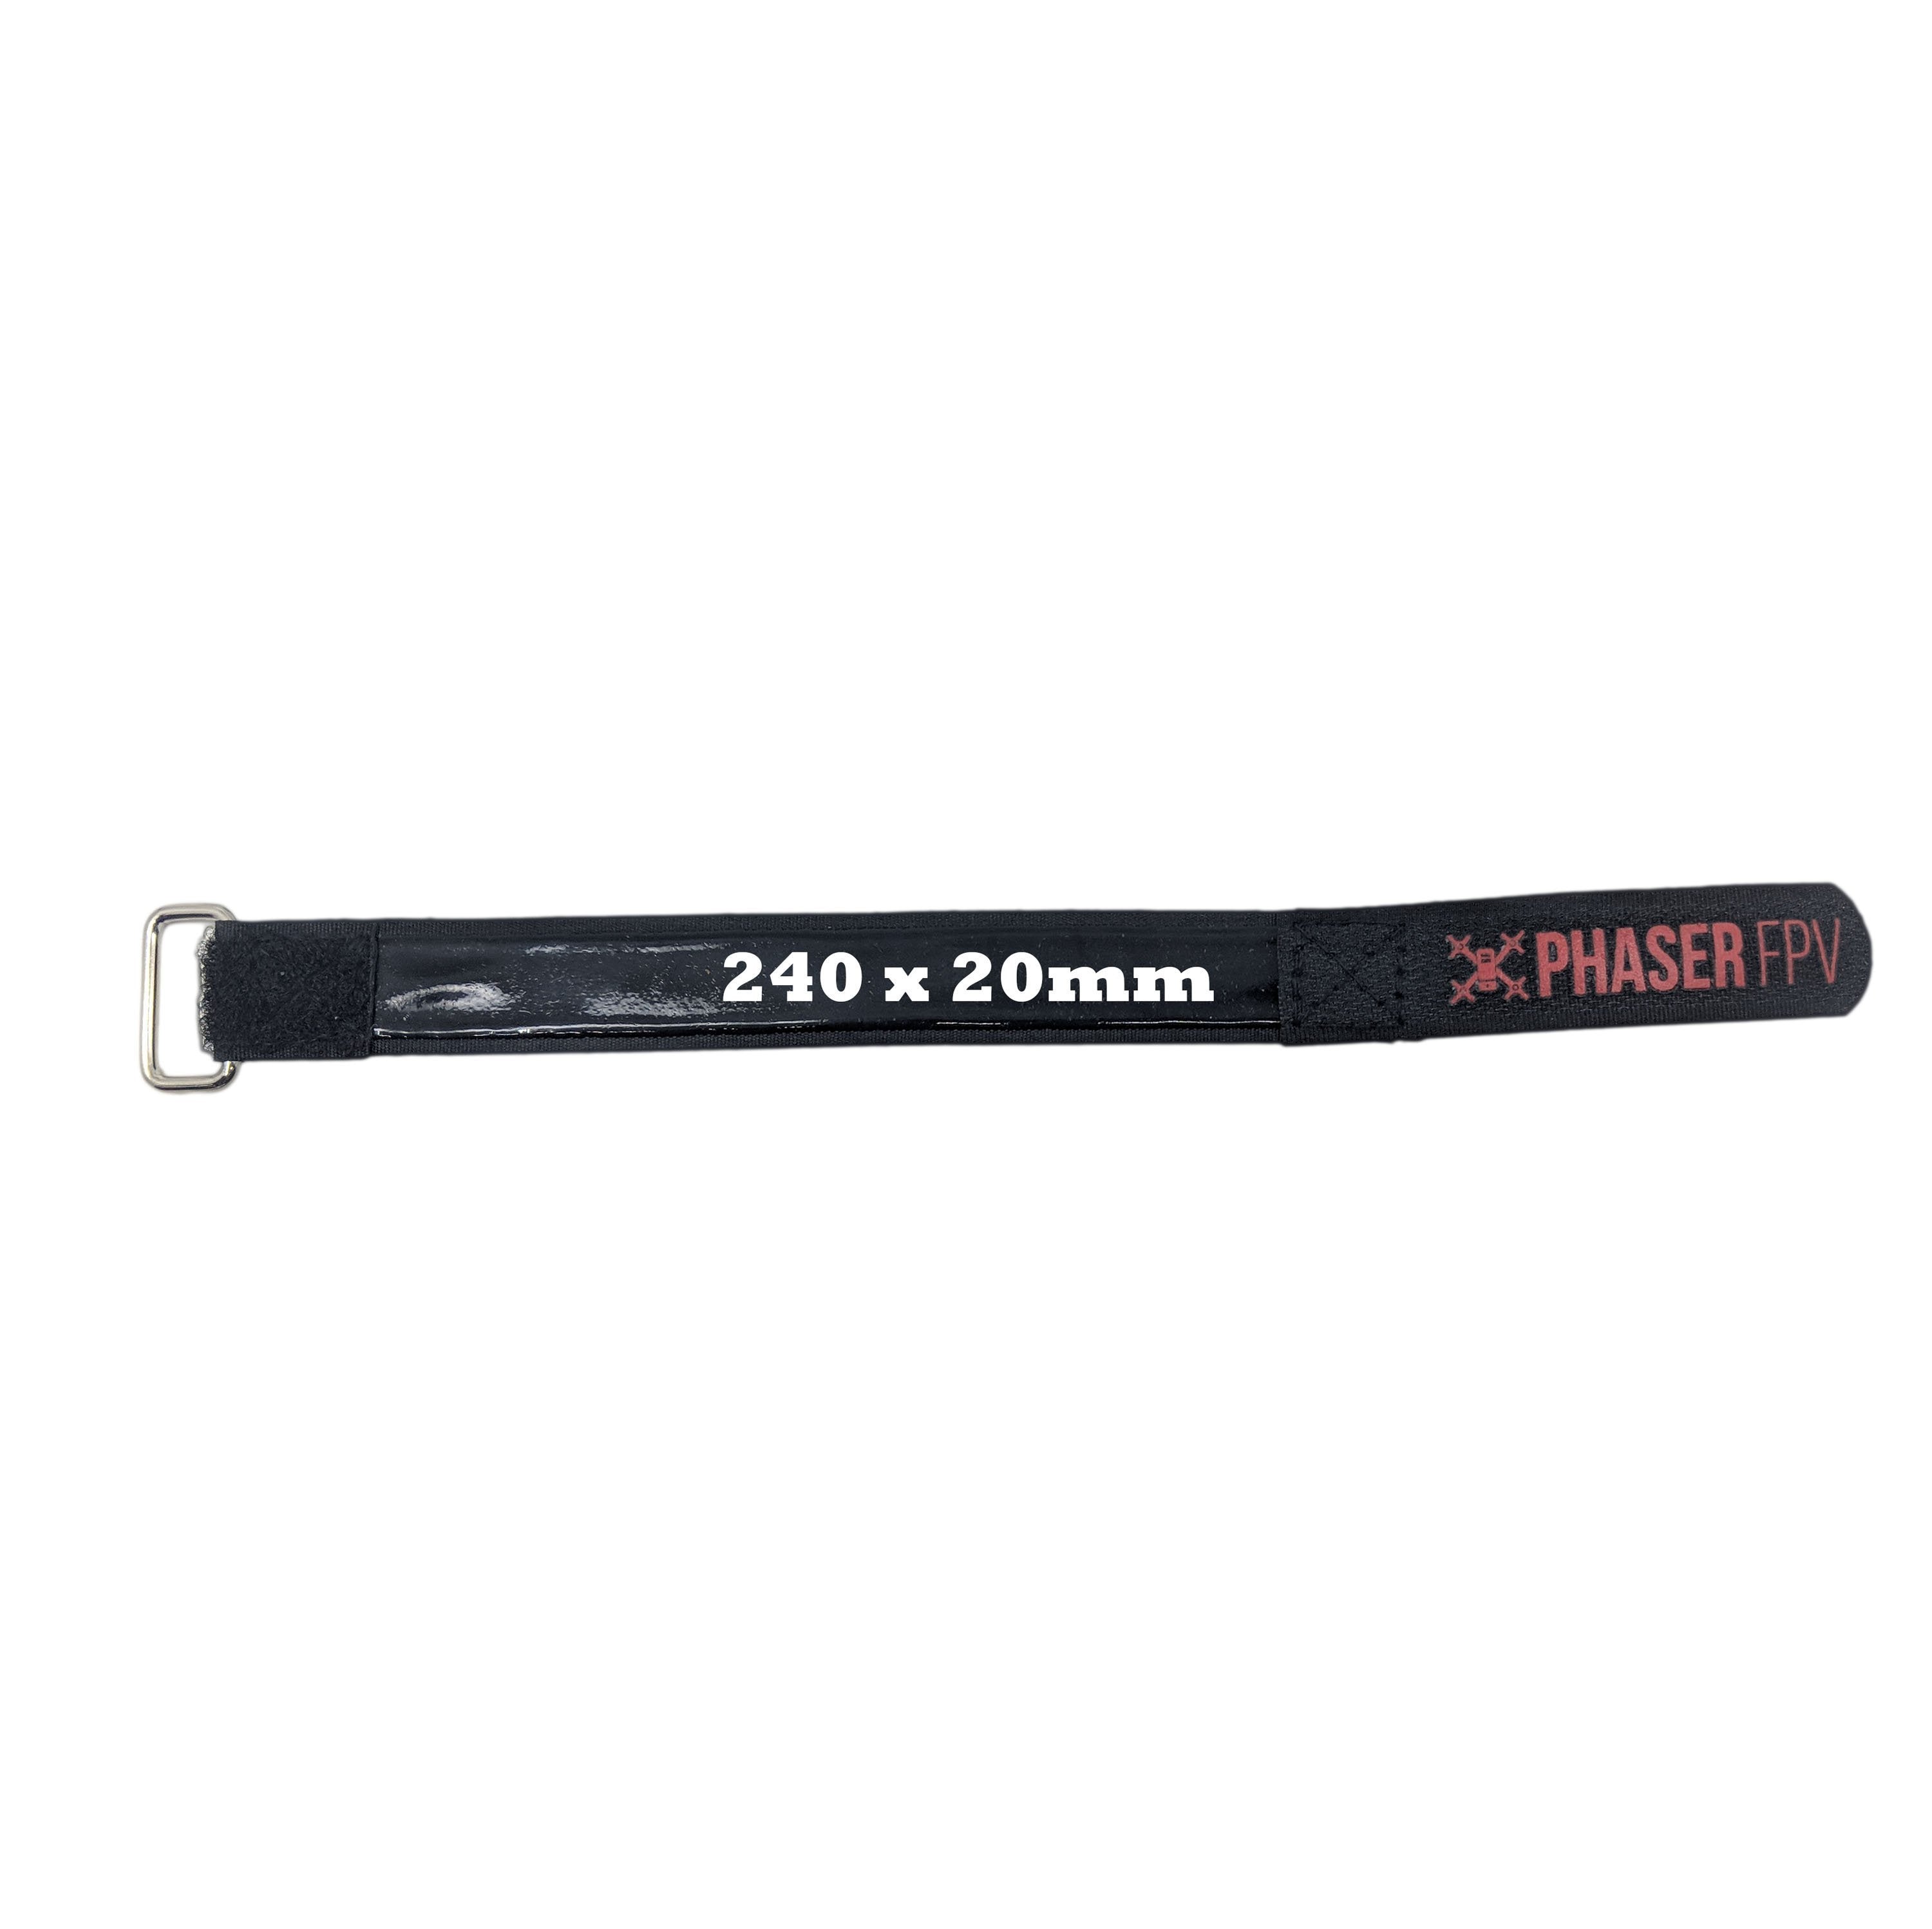 Lipo Battery Strap 240x20mm With Non-slip Coating Phaser FPV Branded